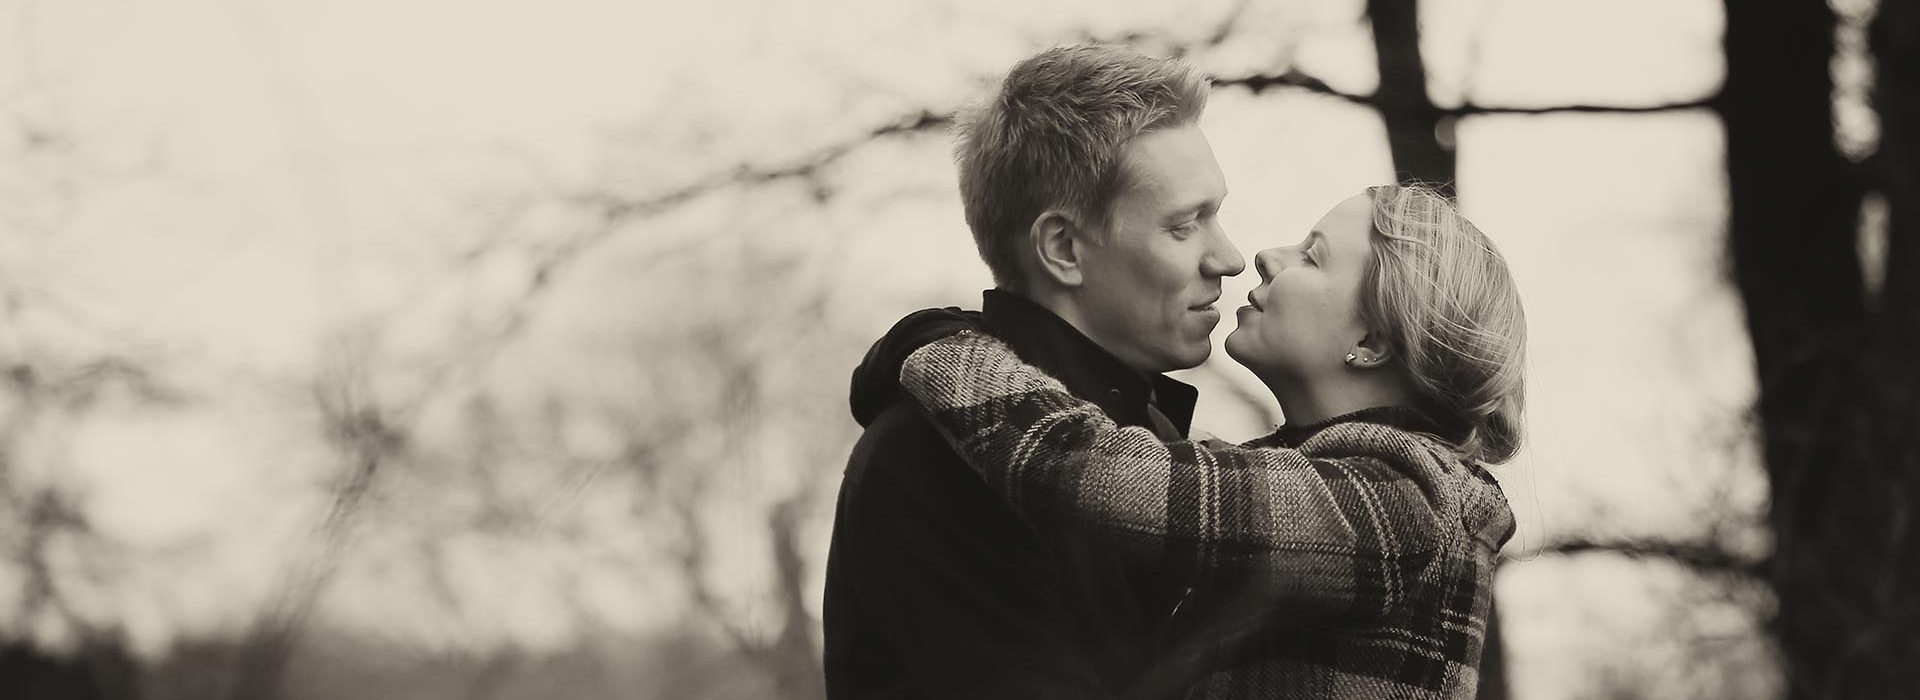 Love-Story-Shooting mit Alanah & Christian in Wolfsburg